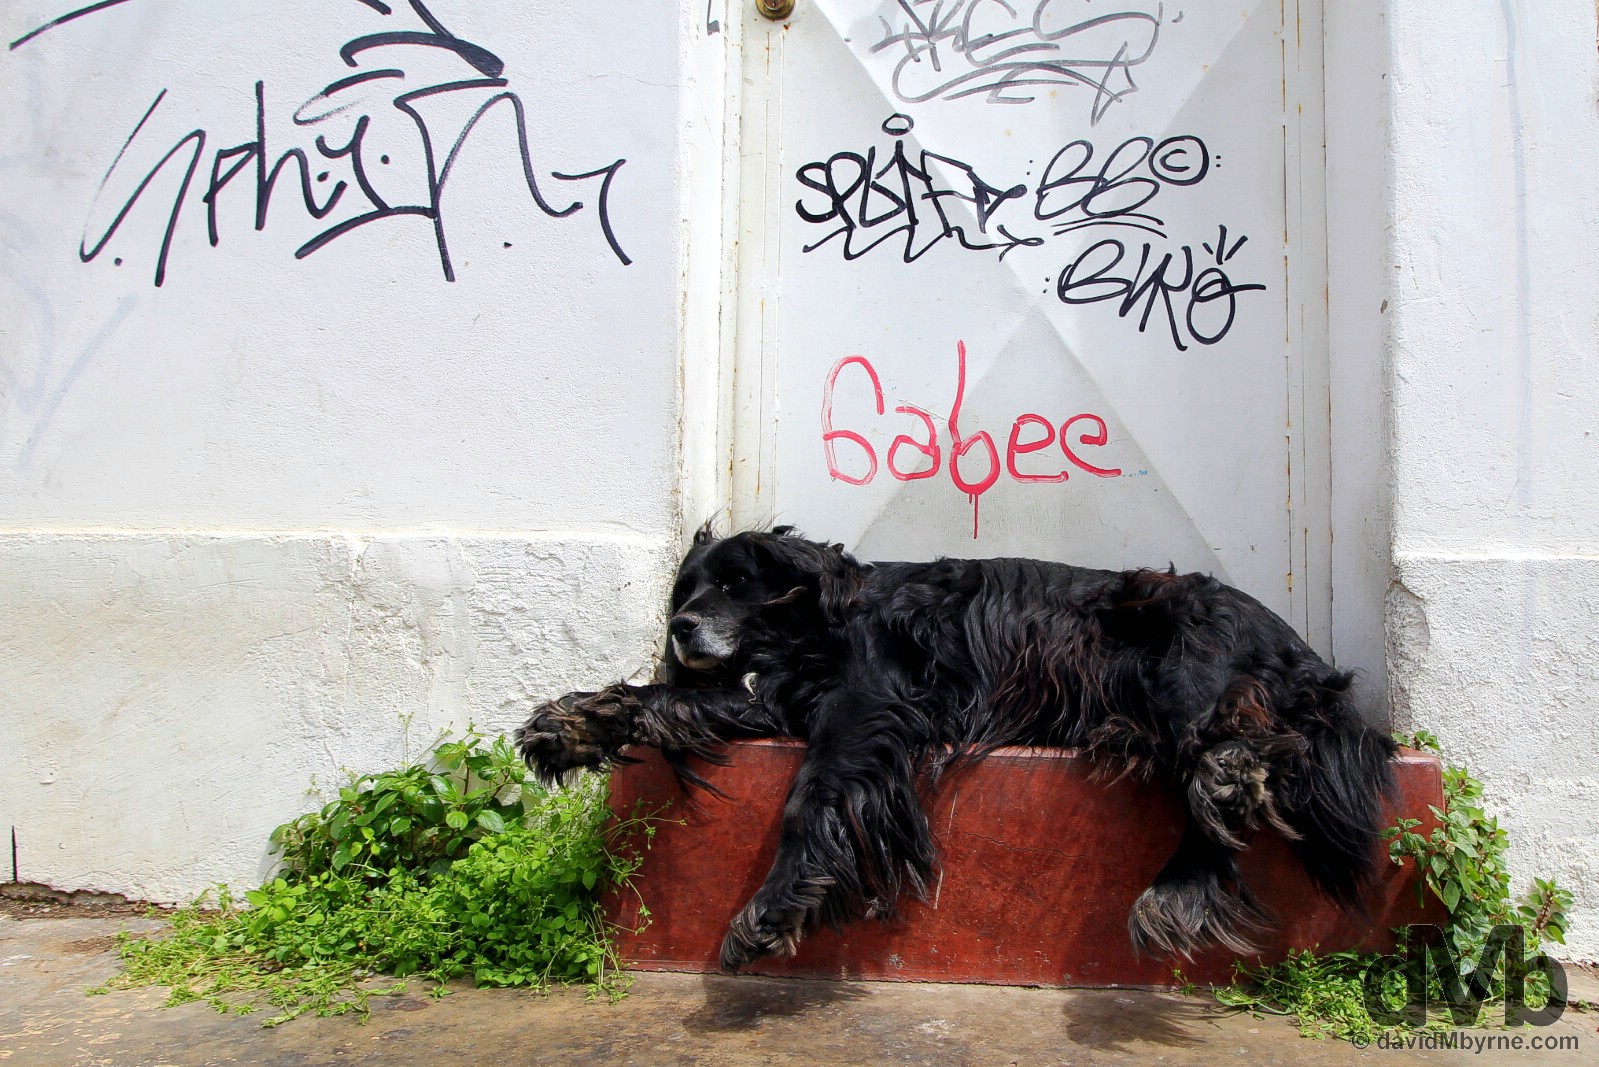 Dog tired in Valparaiso, Chile. October 8, 2015. 